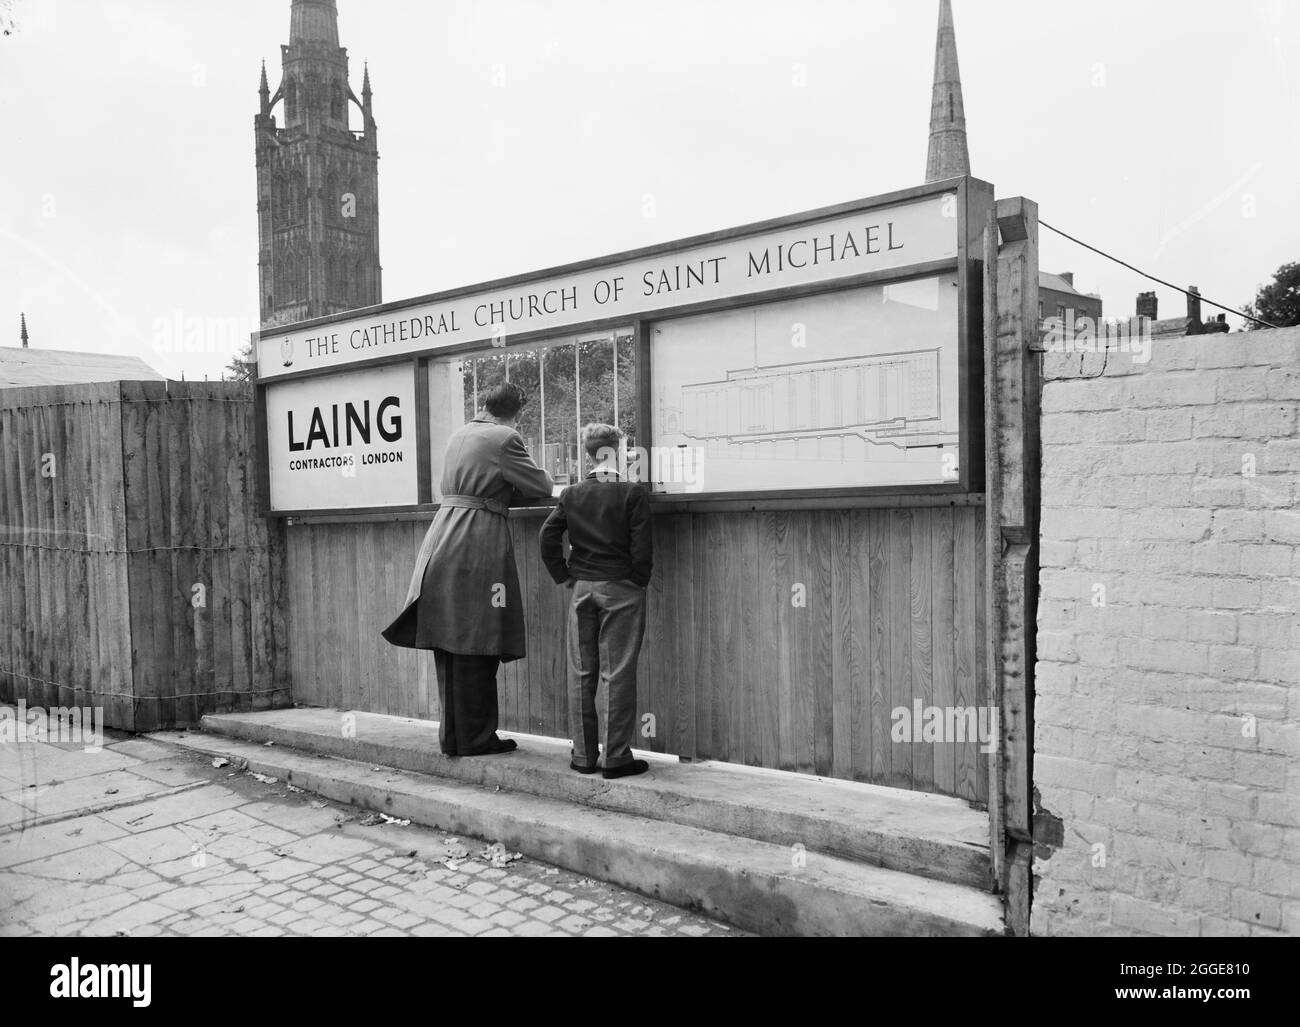 A man and boy looking through a viewing window at the construction site of Coventry Cathedral, with the Laing logo displayed on the left side, an elevation drawing of the cathedral displayed on the right side and a sign overhead displaying the cathedral name. This image was catalogued as part of the Breaking New Ground Project in partnership with the John Laing Charitable Trust in 2019-20. Stock Photo